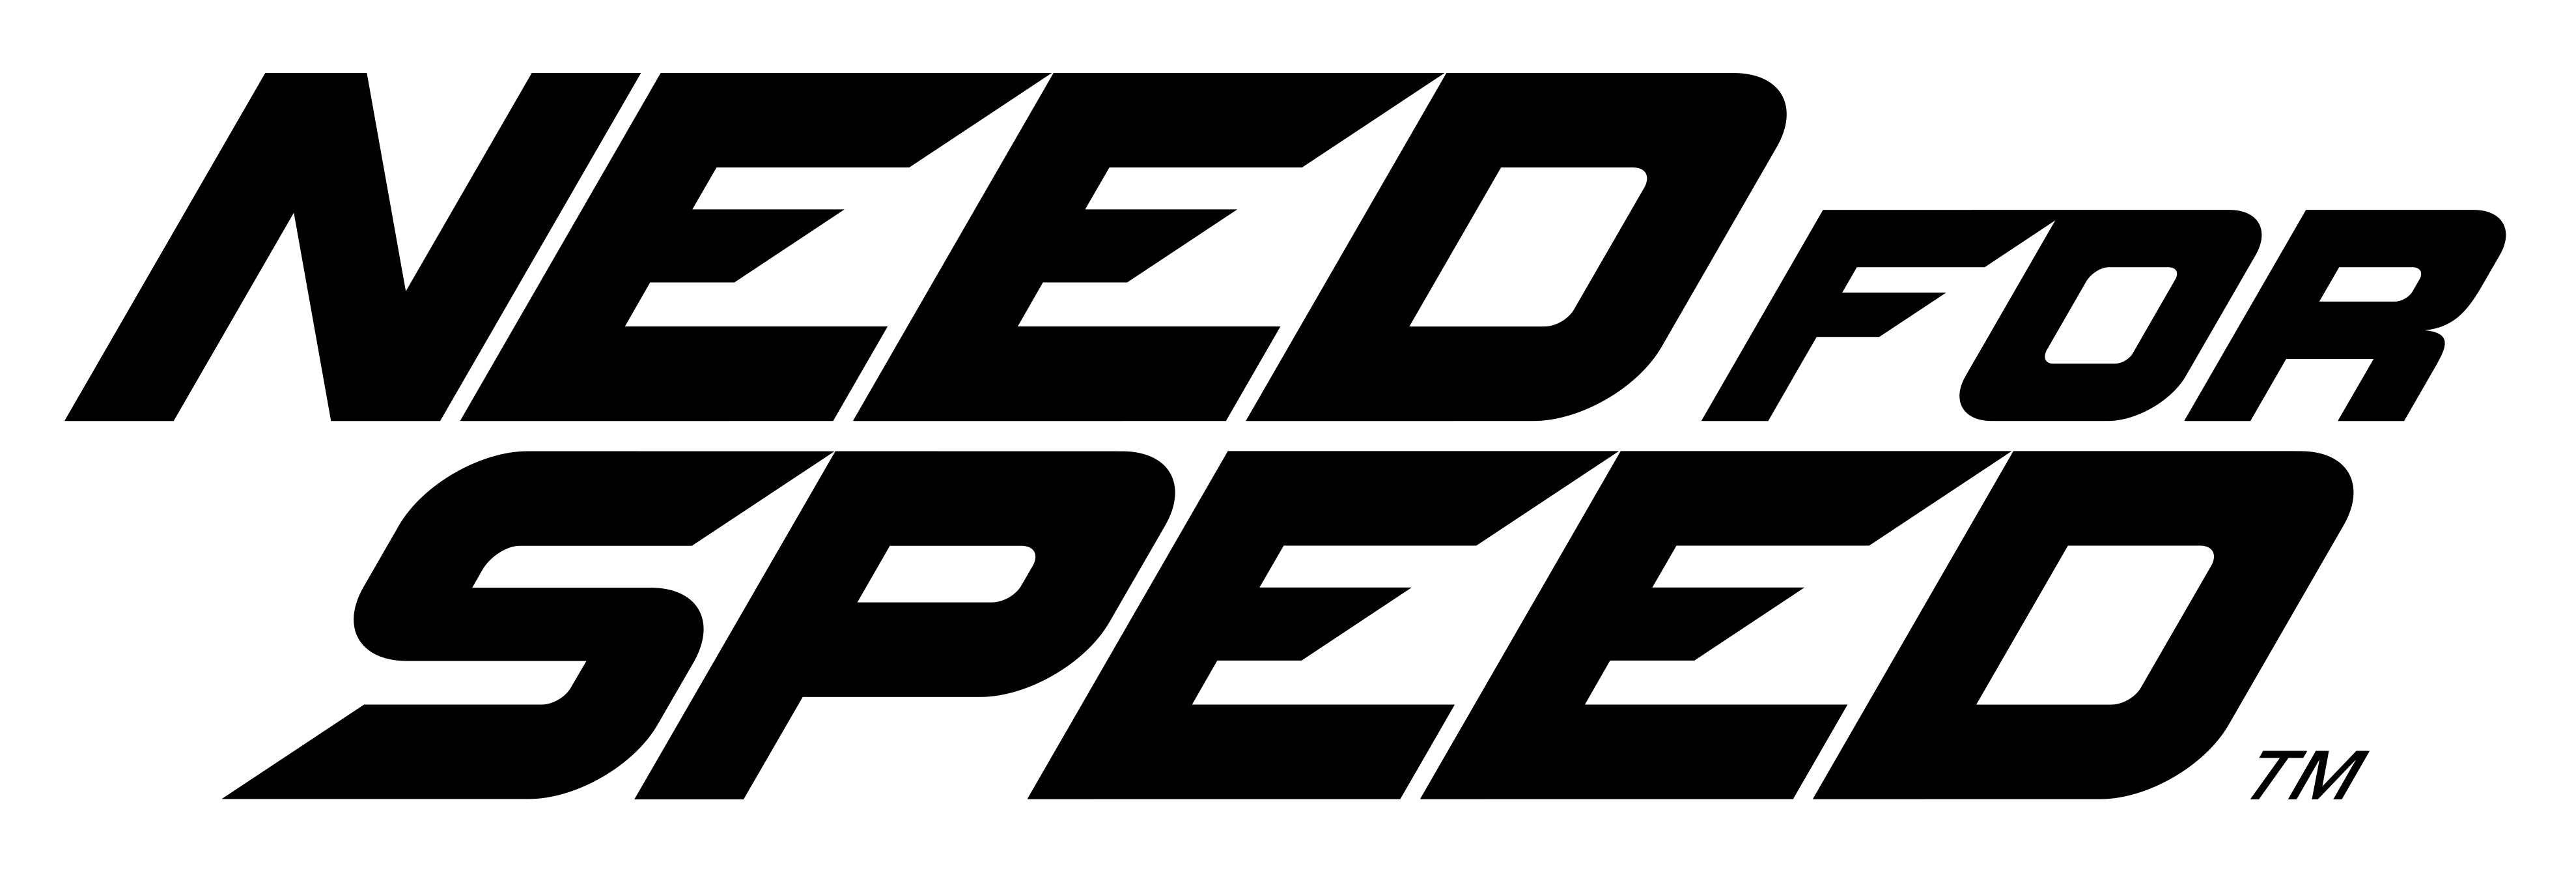 Need for Speed Logo (NFS) png